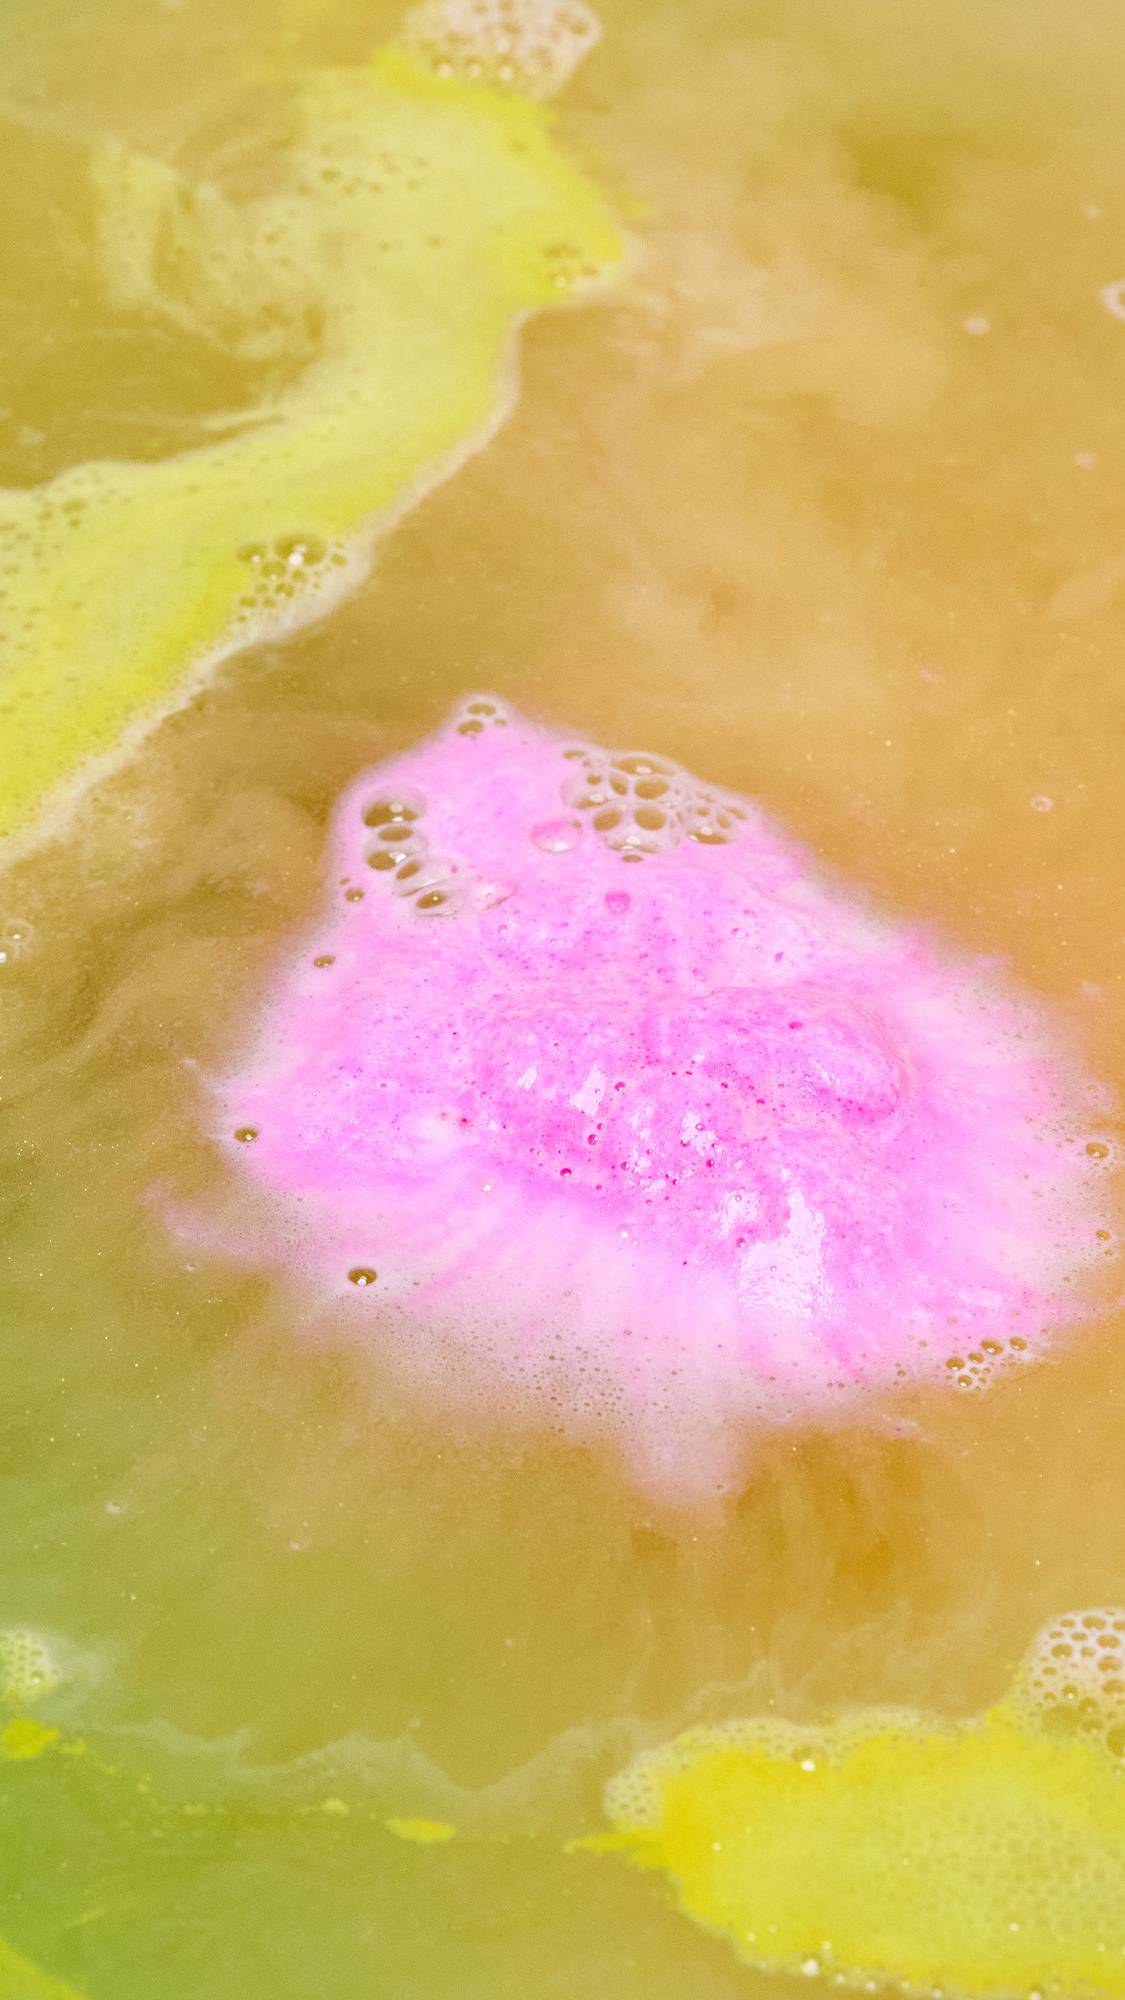 The Pig In A Poke bath bomb has dissolved leaving behind fresh, golden bath water laced with thin, velvety foam and a flash of pink in the centre. 